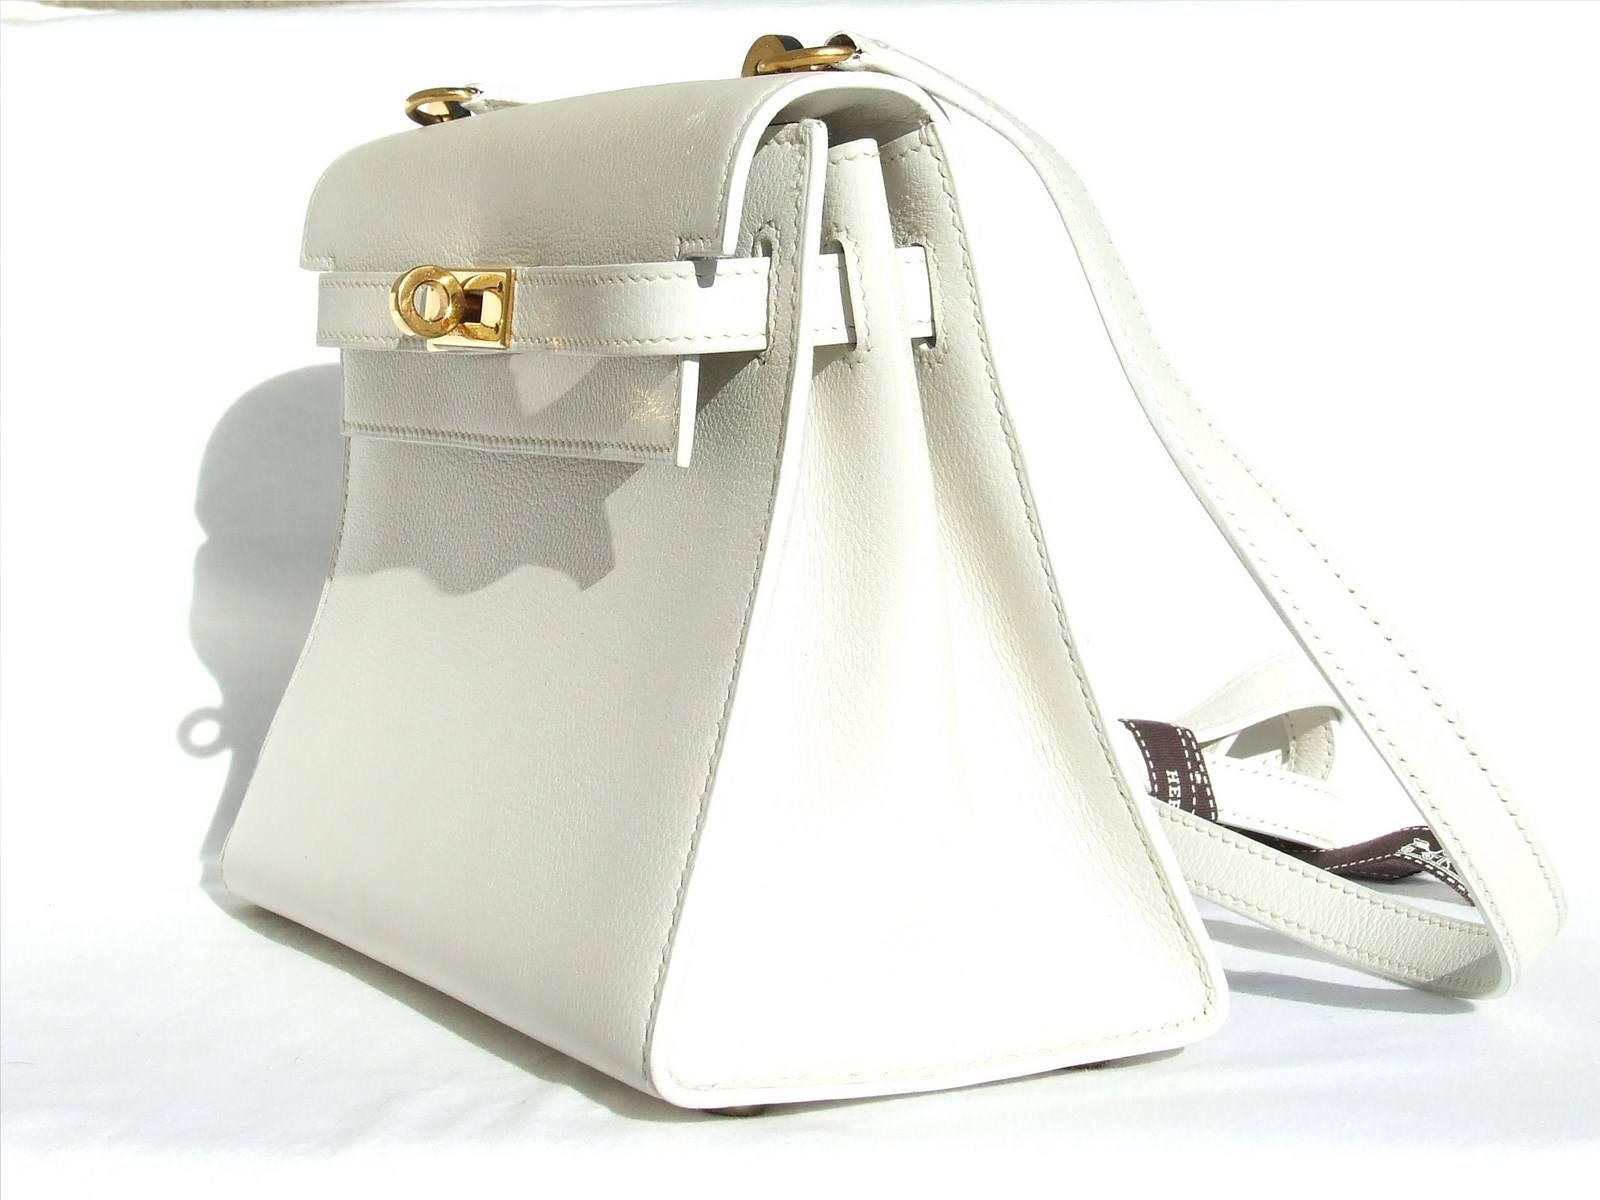 Super Cute Authentic Hermès Mini Kelly Bag

In sellier Version, more chic !

Made in France

Stamp S in a circle (1989)

Made of Grained Leather and Golden Hardware

Lined with smooth white Leather

Colorway: White

1 main compartment, 1 flat